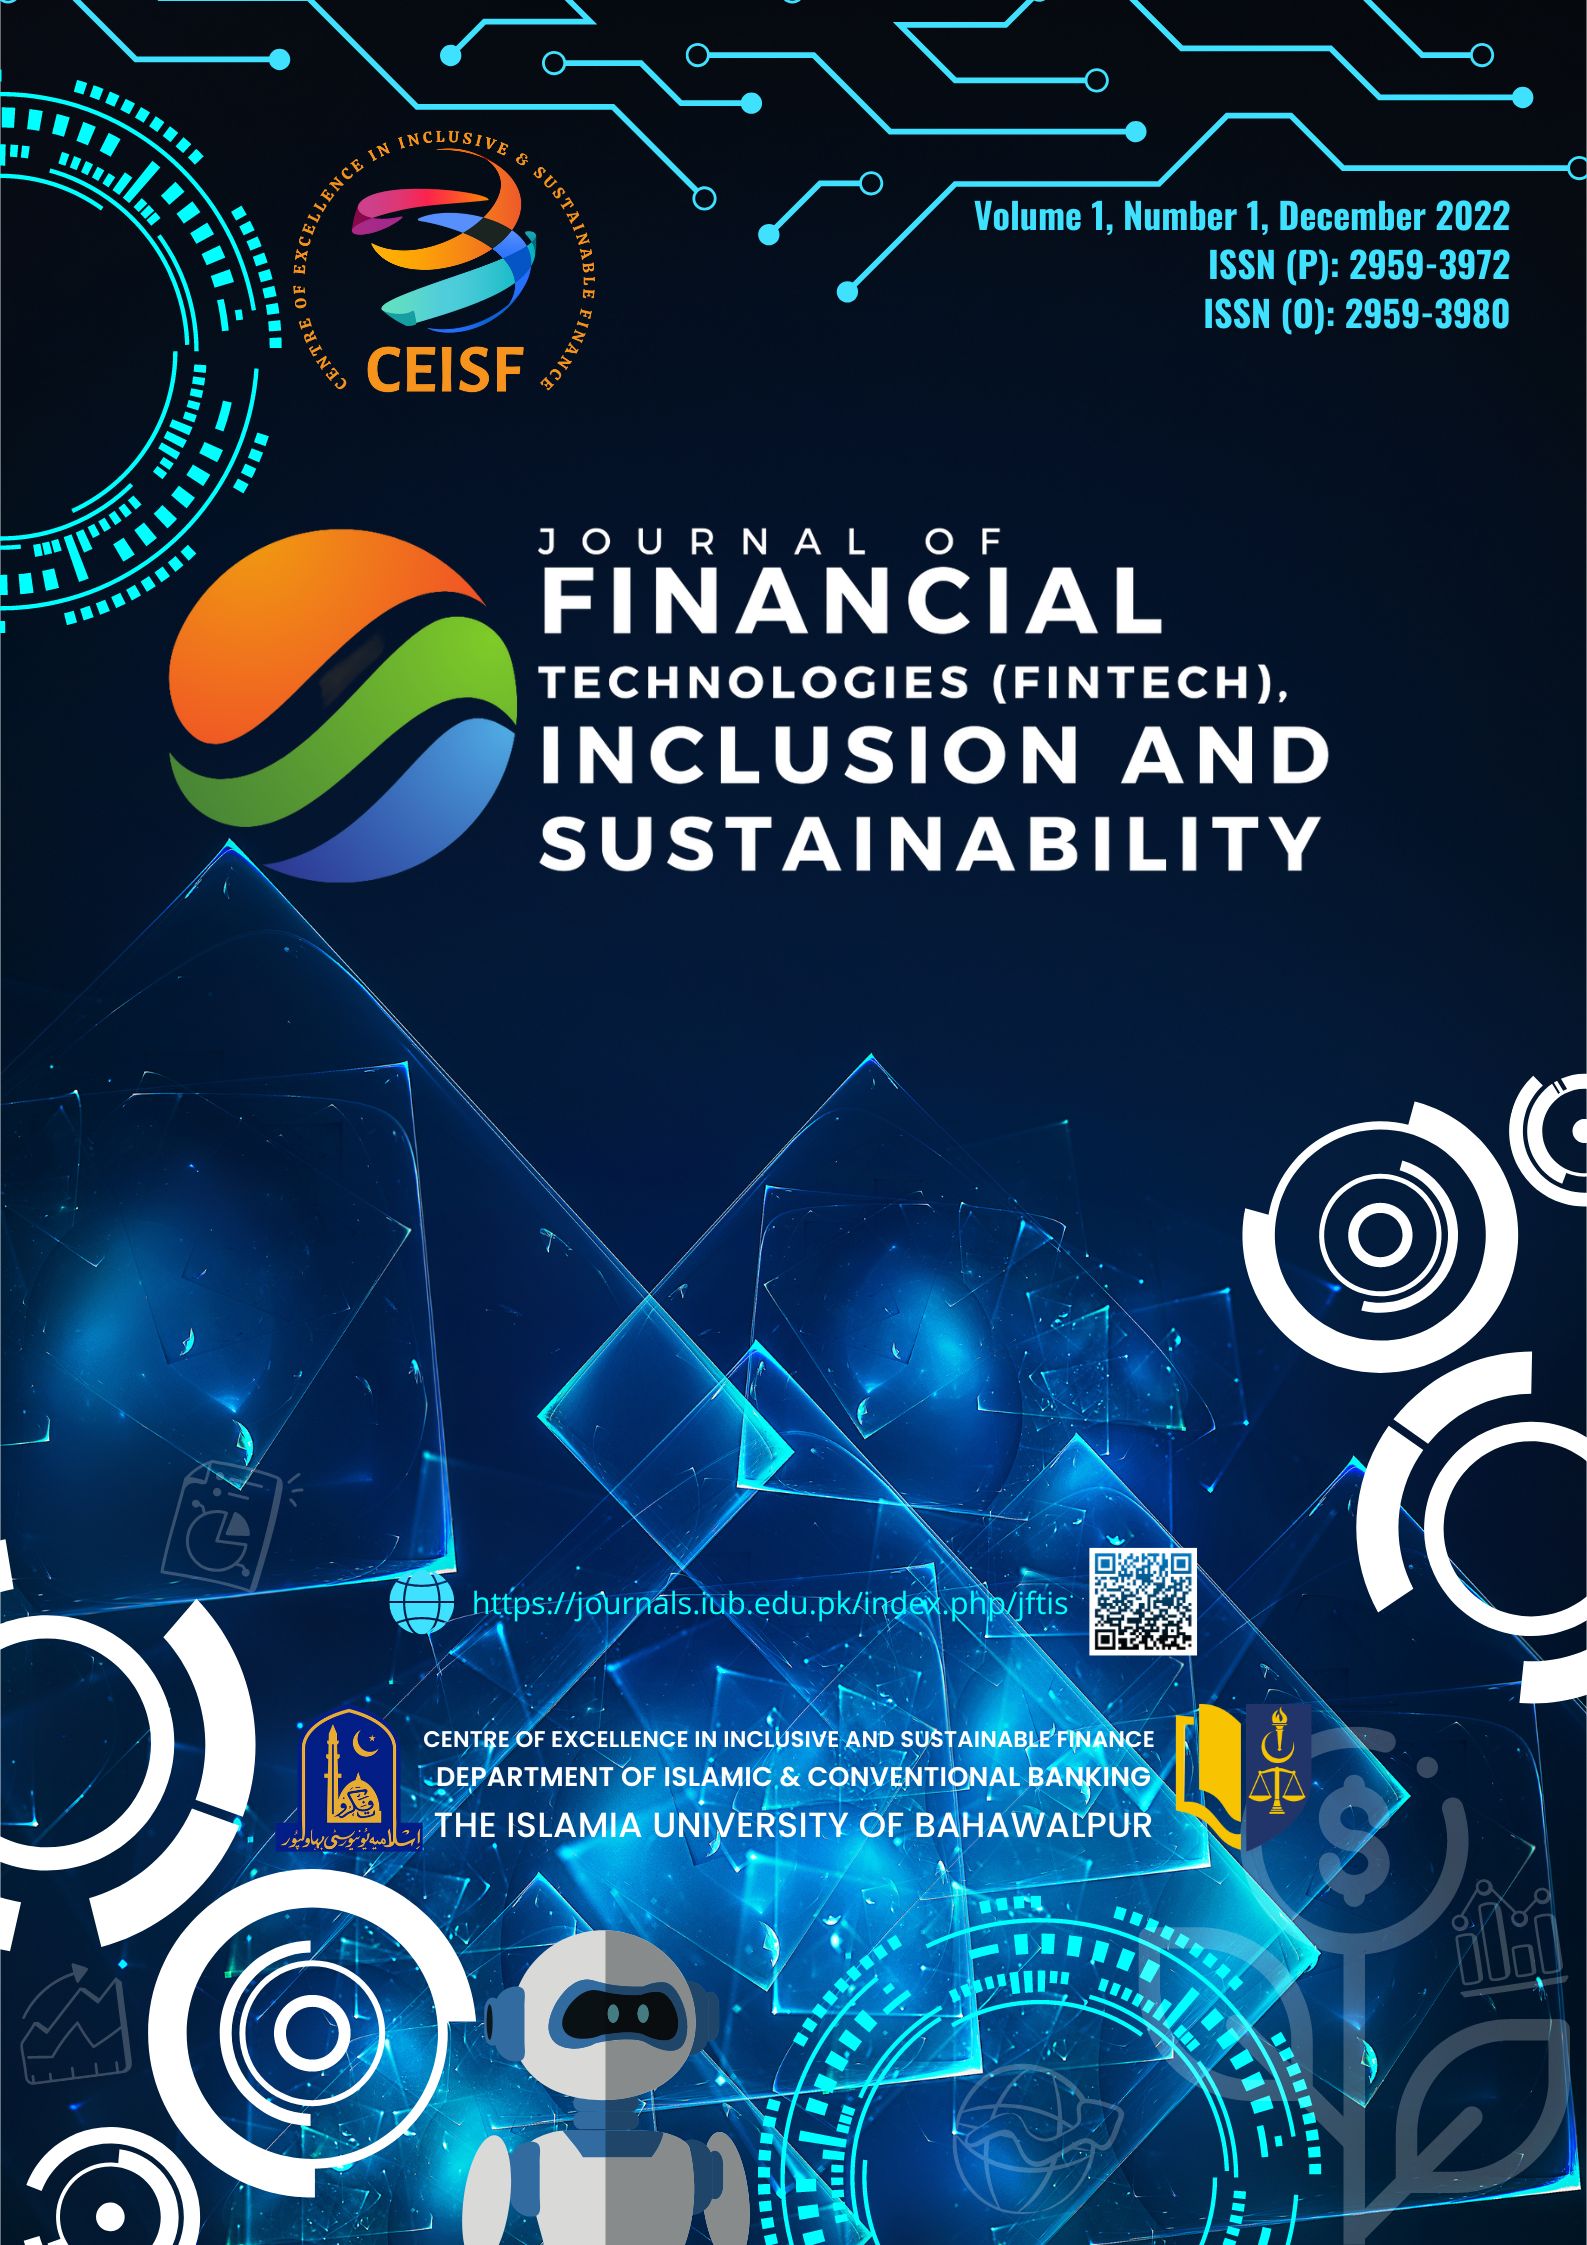 					View Vol. 1 No. 1 (2022): Journal of Financial Technologies (Fintech), Inclusion and Sustainability (JFTIS)
				